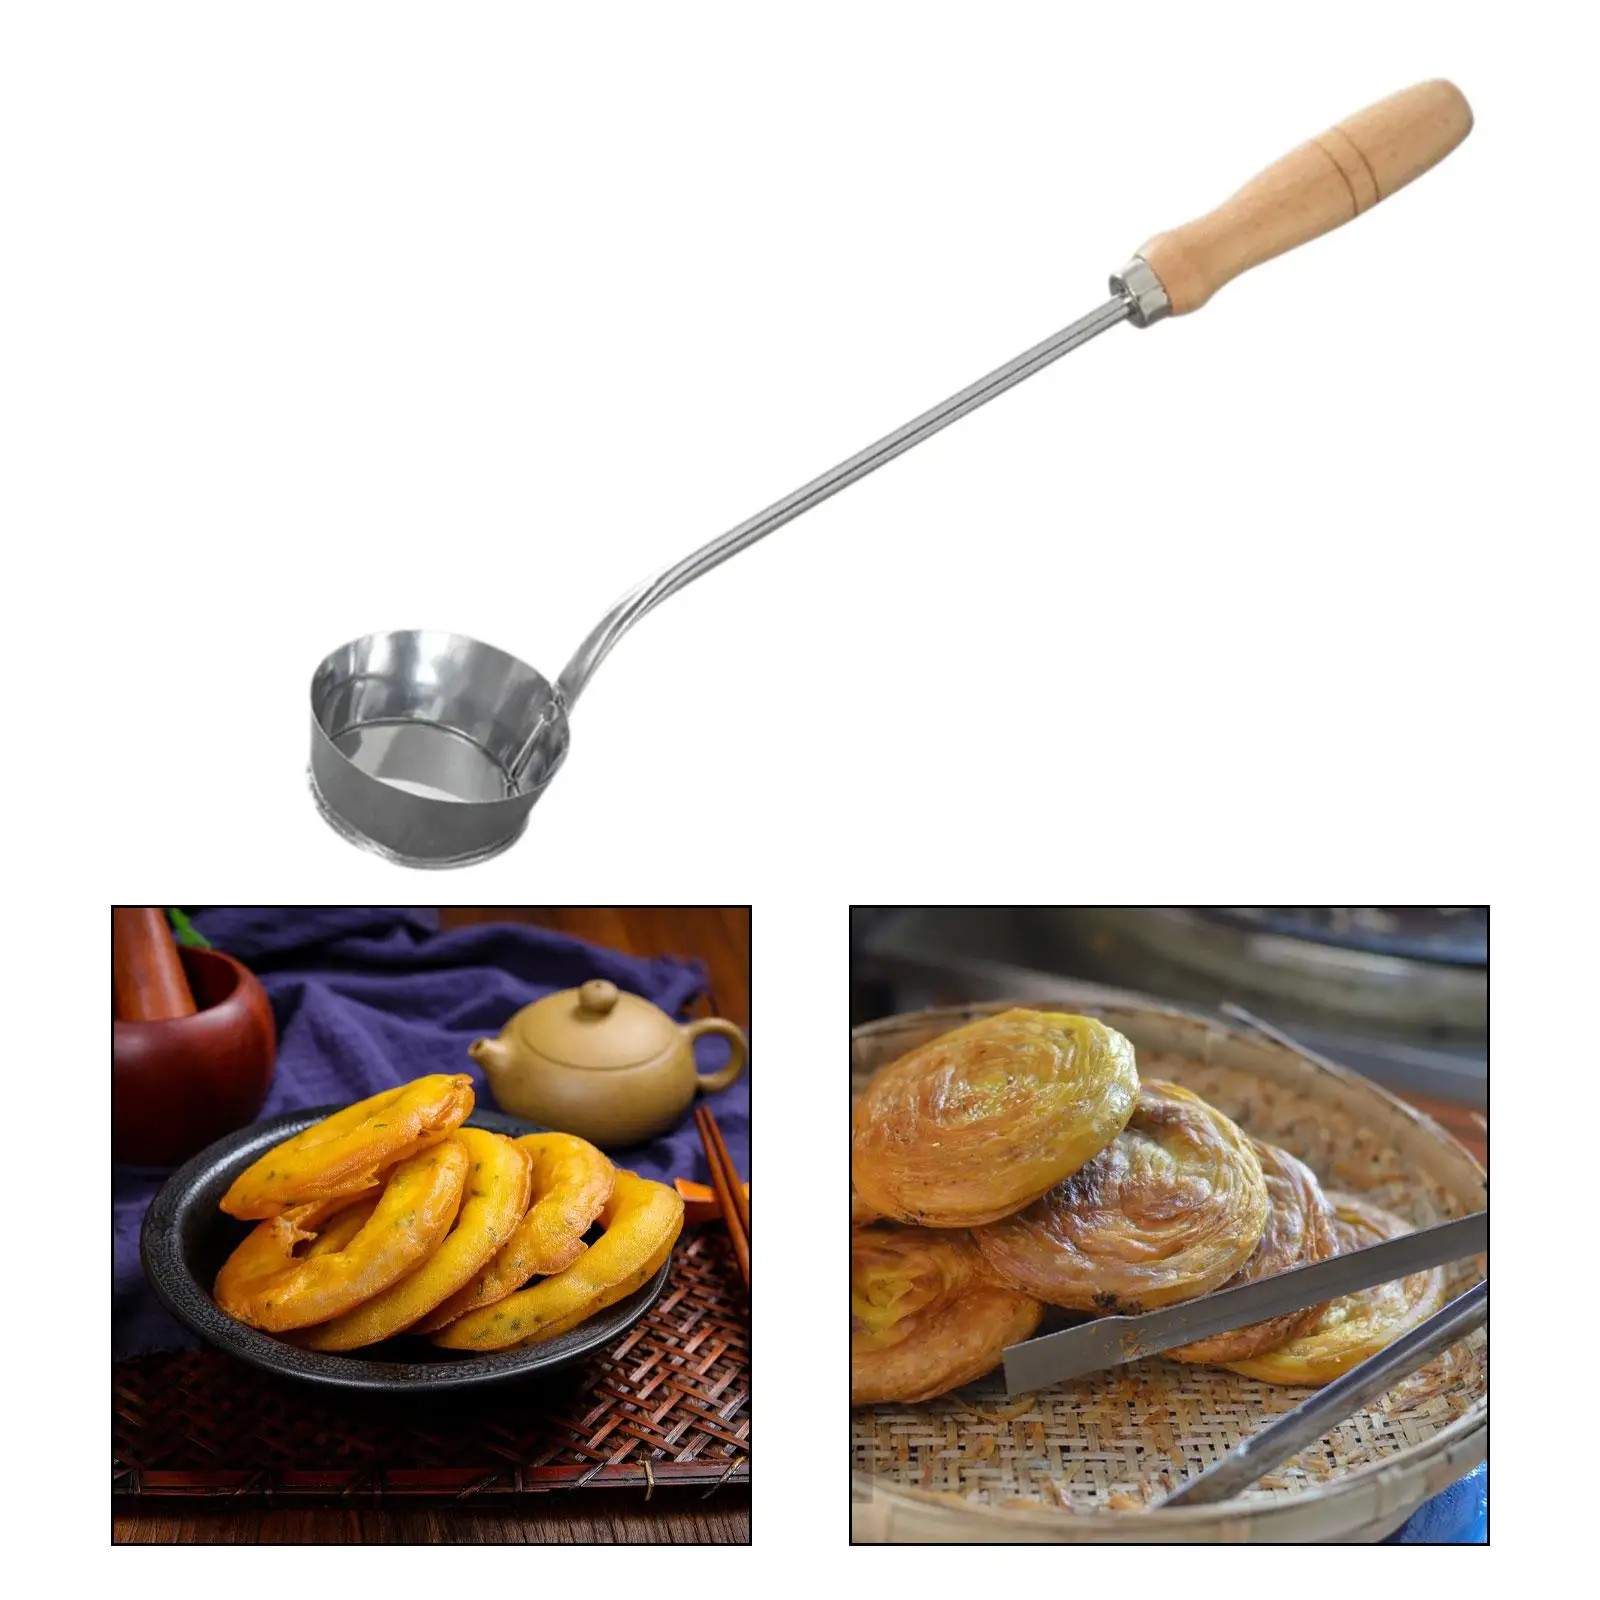 Manual Fried Meat Spoon Practical Kitchen Tools Professional Kitchen Utensils for Restaurant Picnic Kitchen Household Baking